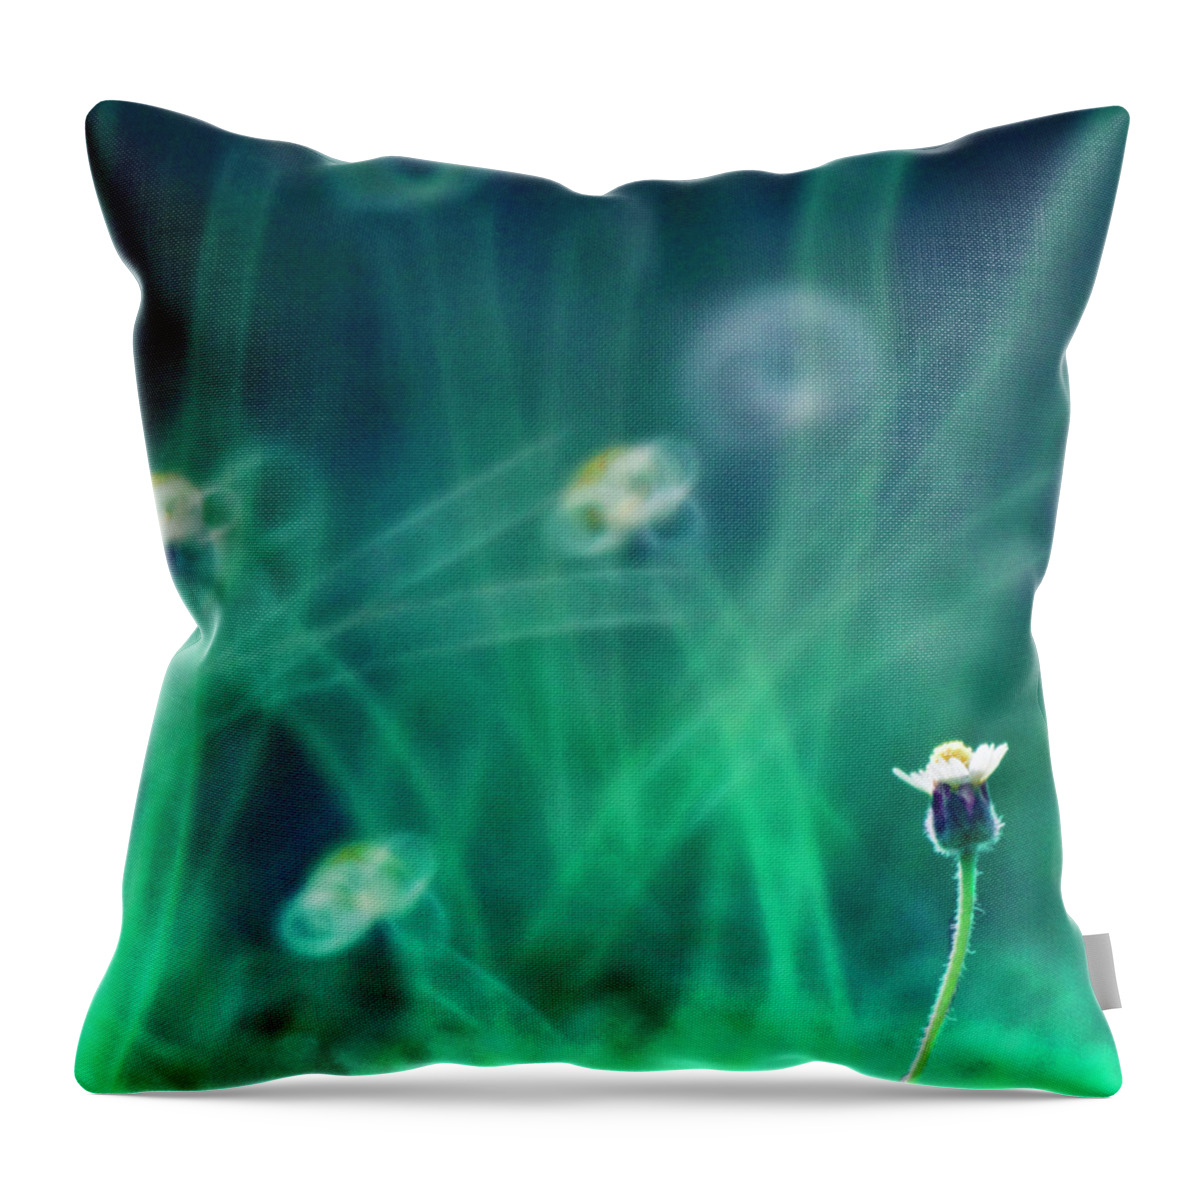 Tanzania Throw Pillow featuring the photograph Wild Flowers In Garden by Twomeows